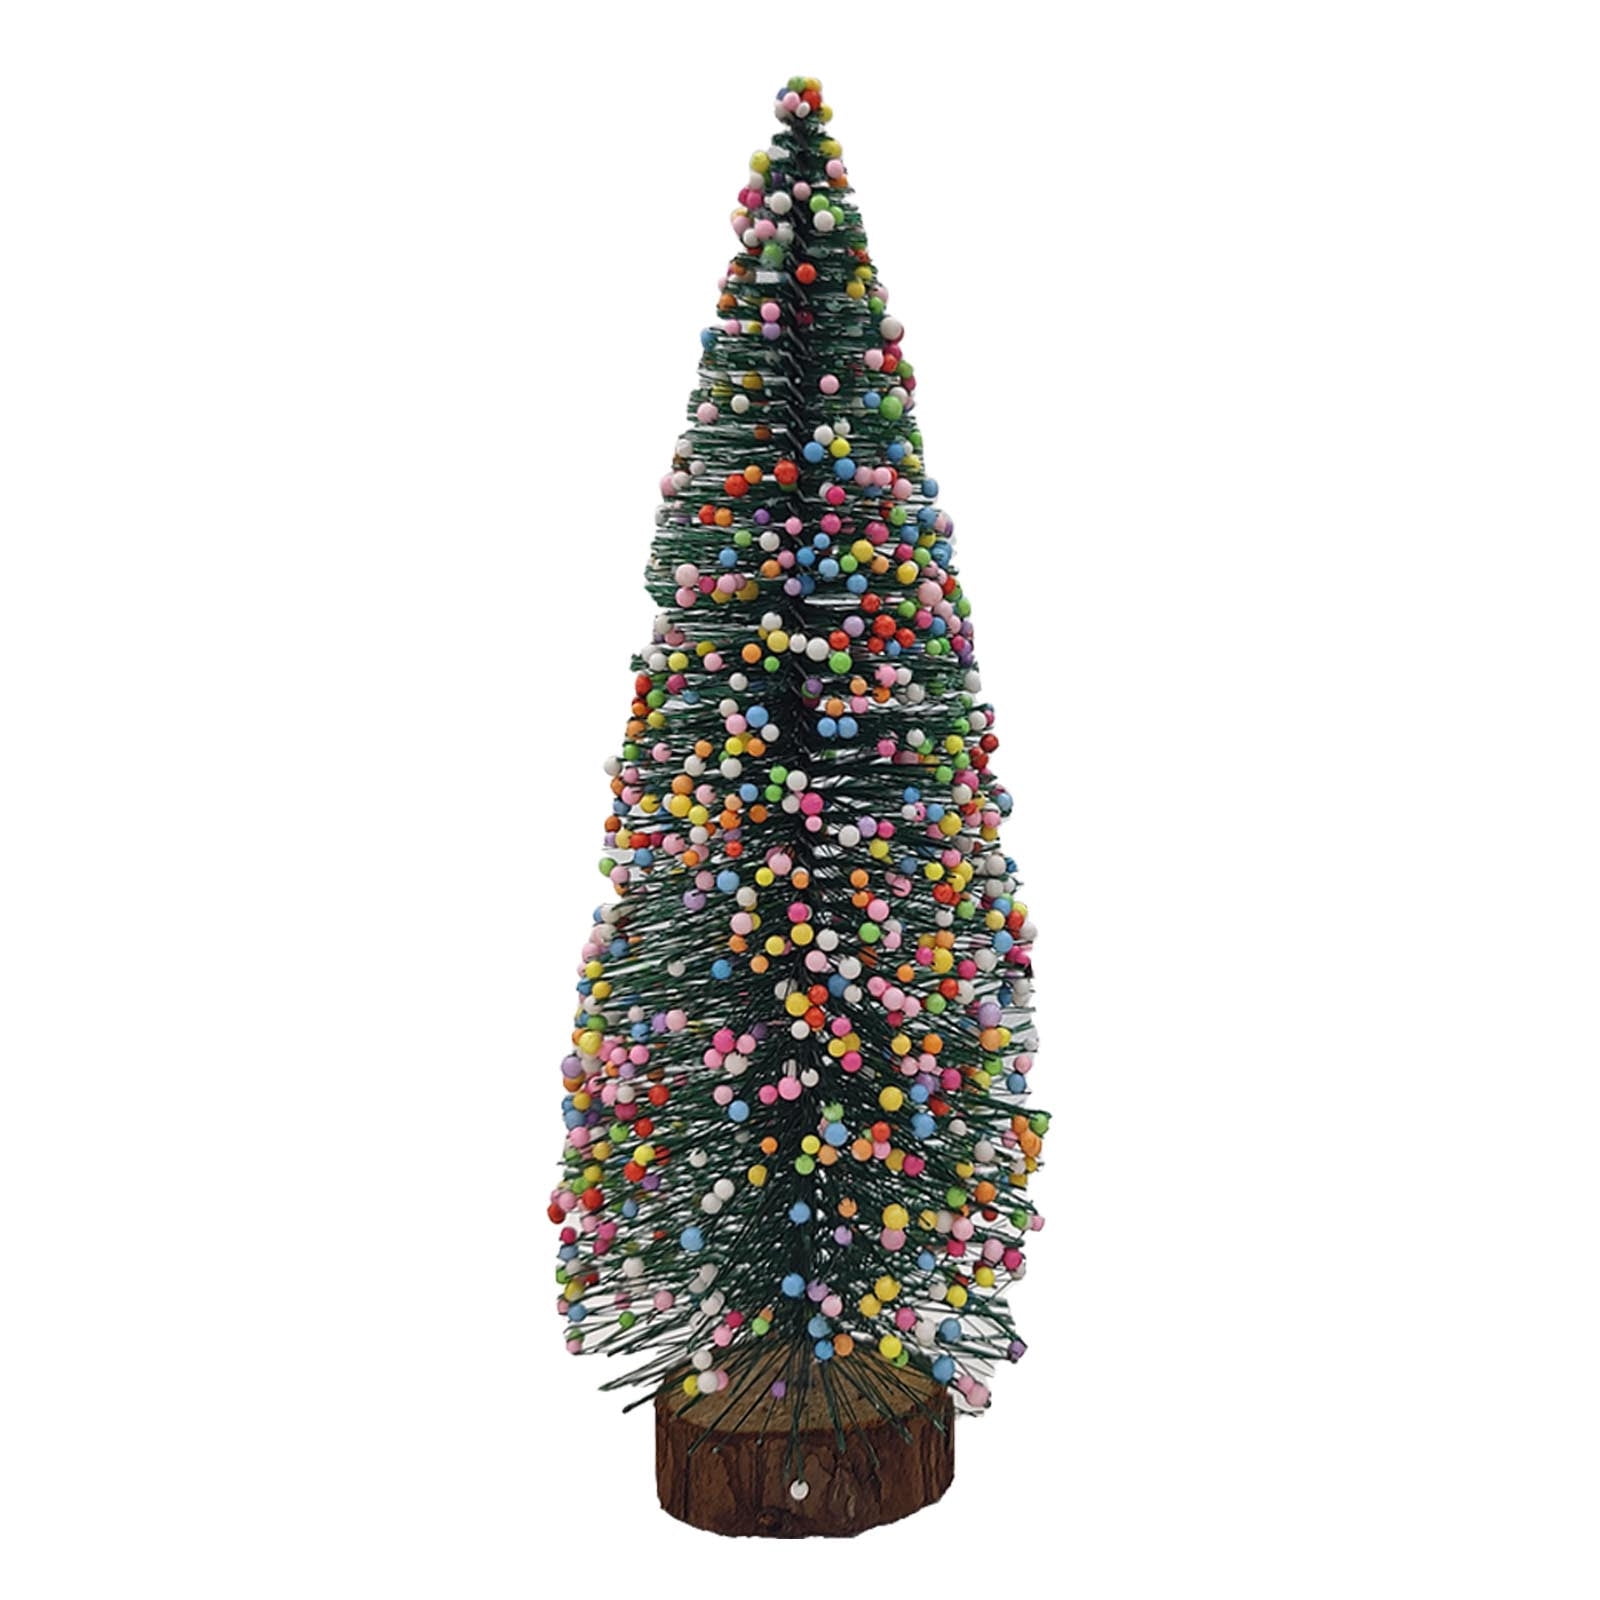 Clearance! Eqwljwe Desktop Miniature Christmas Trees Mini Pine Tree with Snow and Wood Base for Xmas Holiday Party Home Tabletop Decor, Size: Small